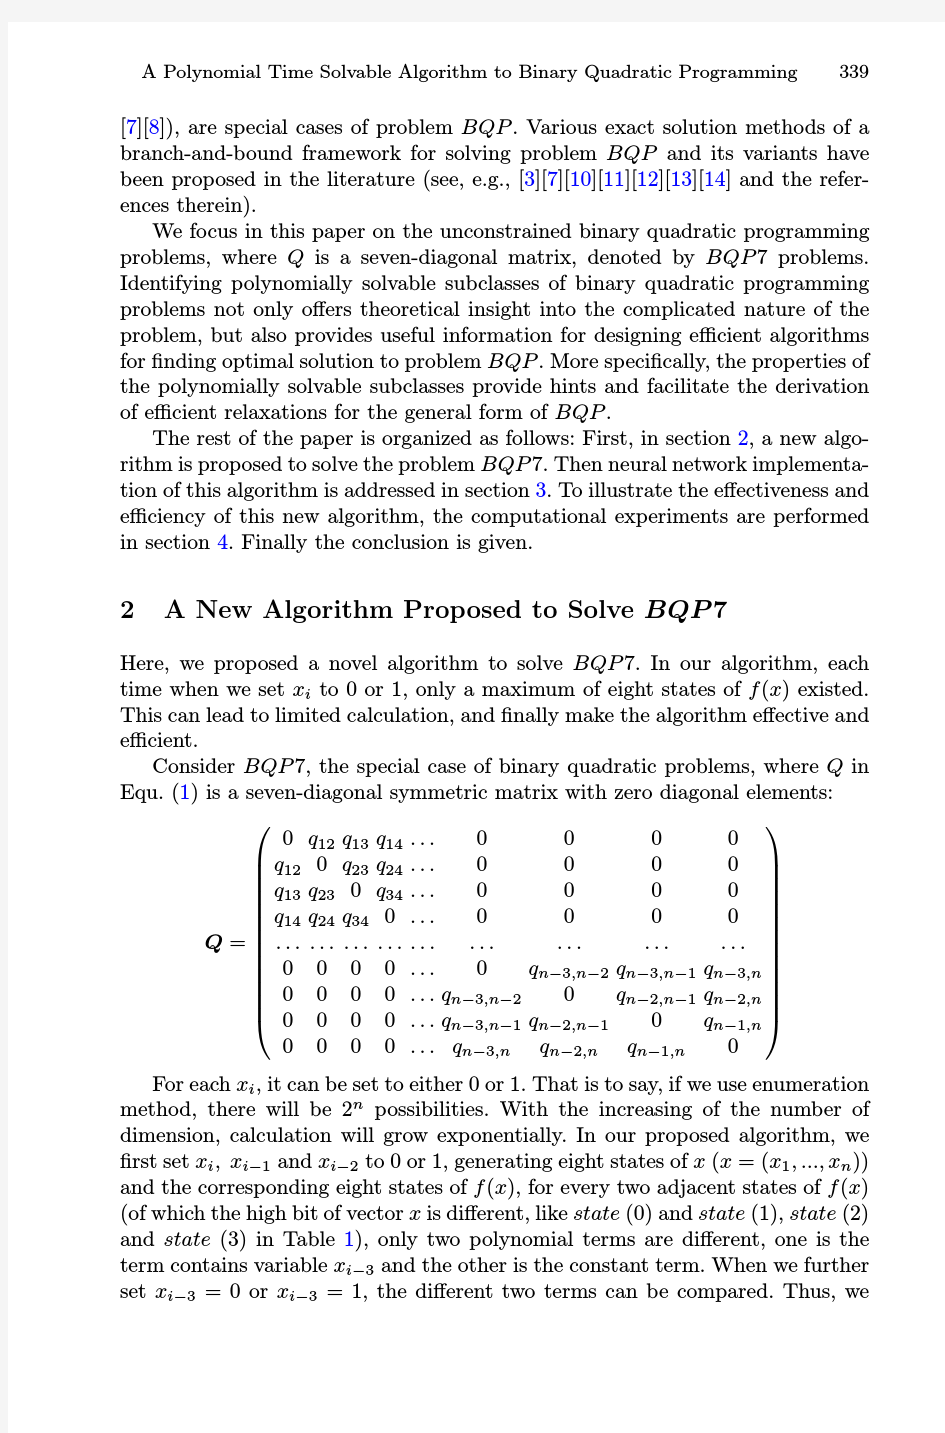 A Polynomial Time Solvable Algorithm to Binary Quadratic Programming Problems wi.